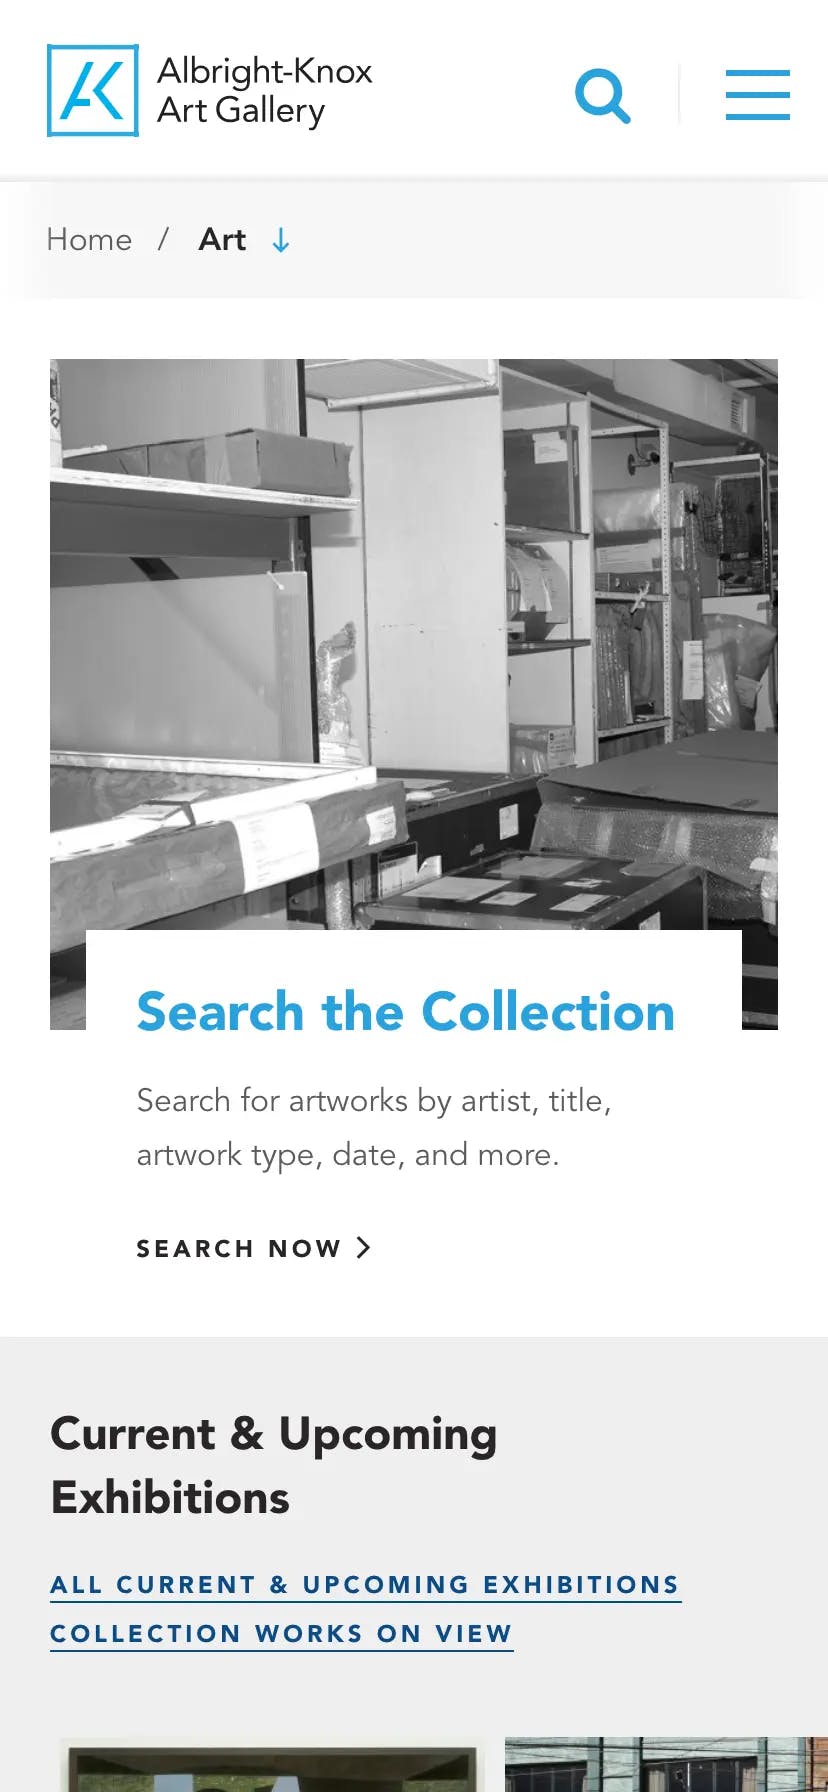 Screenshot of the mobile view of the Albright-Knox's Events & Exhibitions page